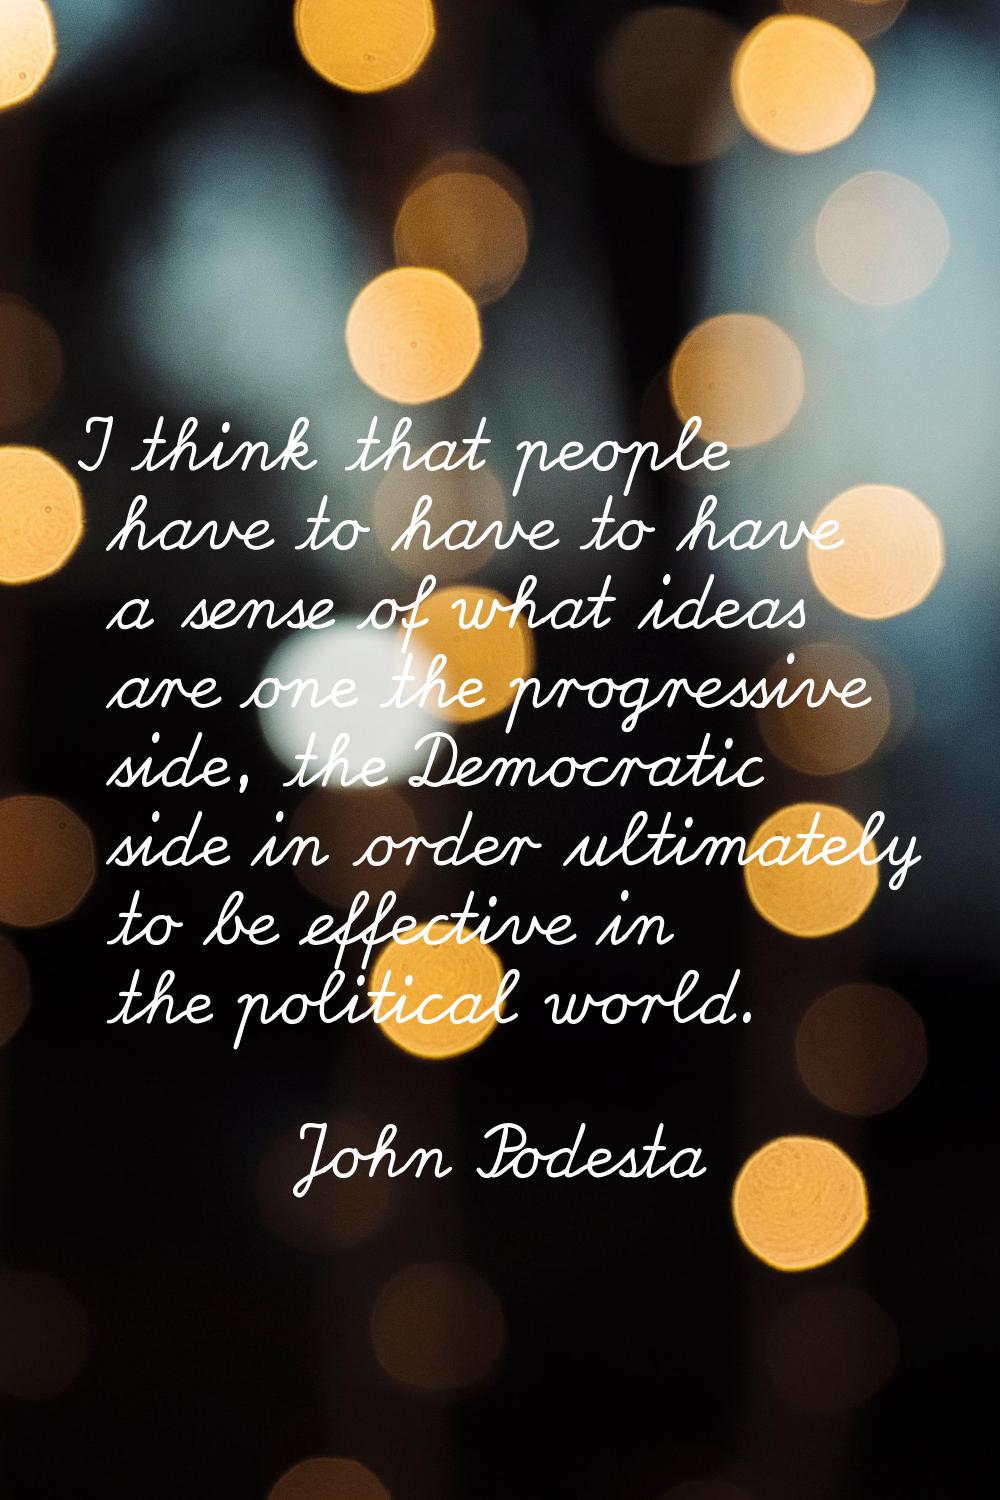 I think that people have to have to have a sense of what ideas are one the progressive side, the De